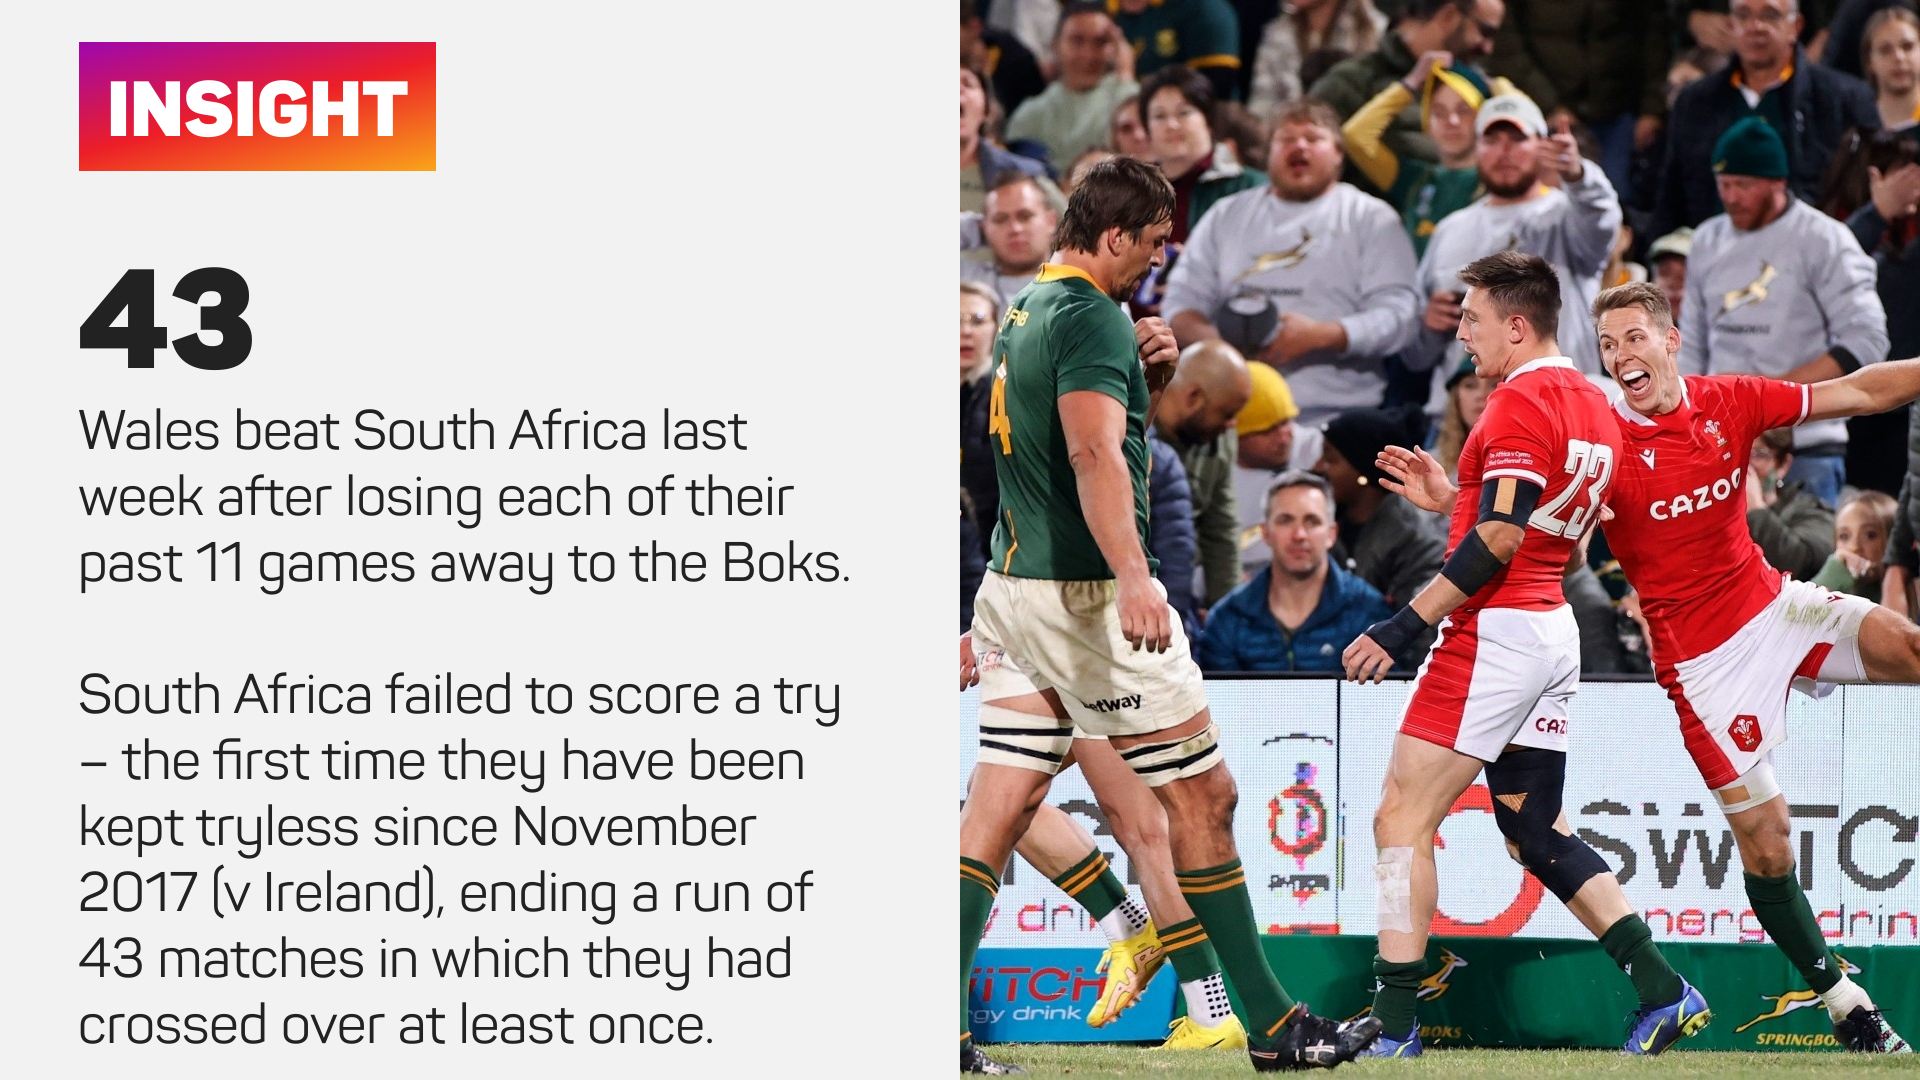 Wales beat South Africa last week after losing each of their past 11 games away to the Boks